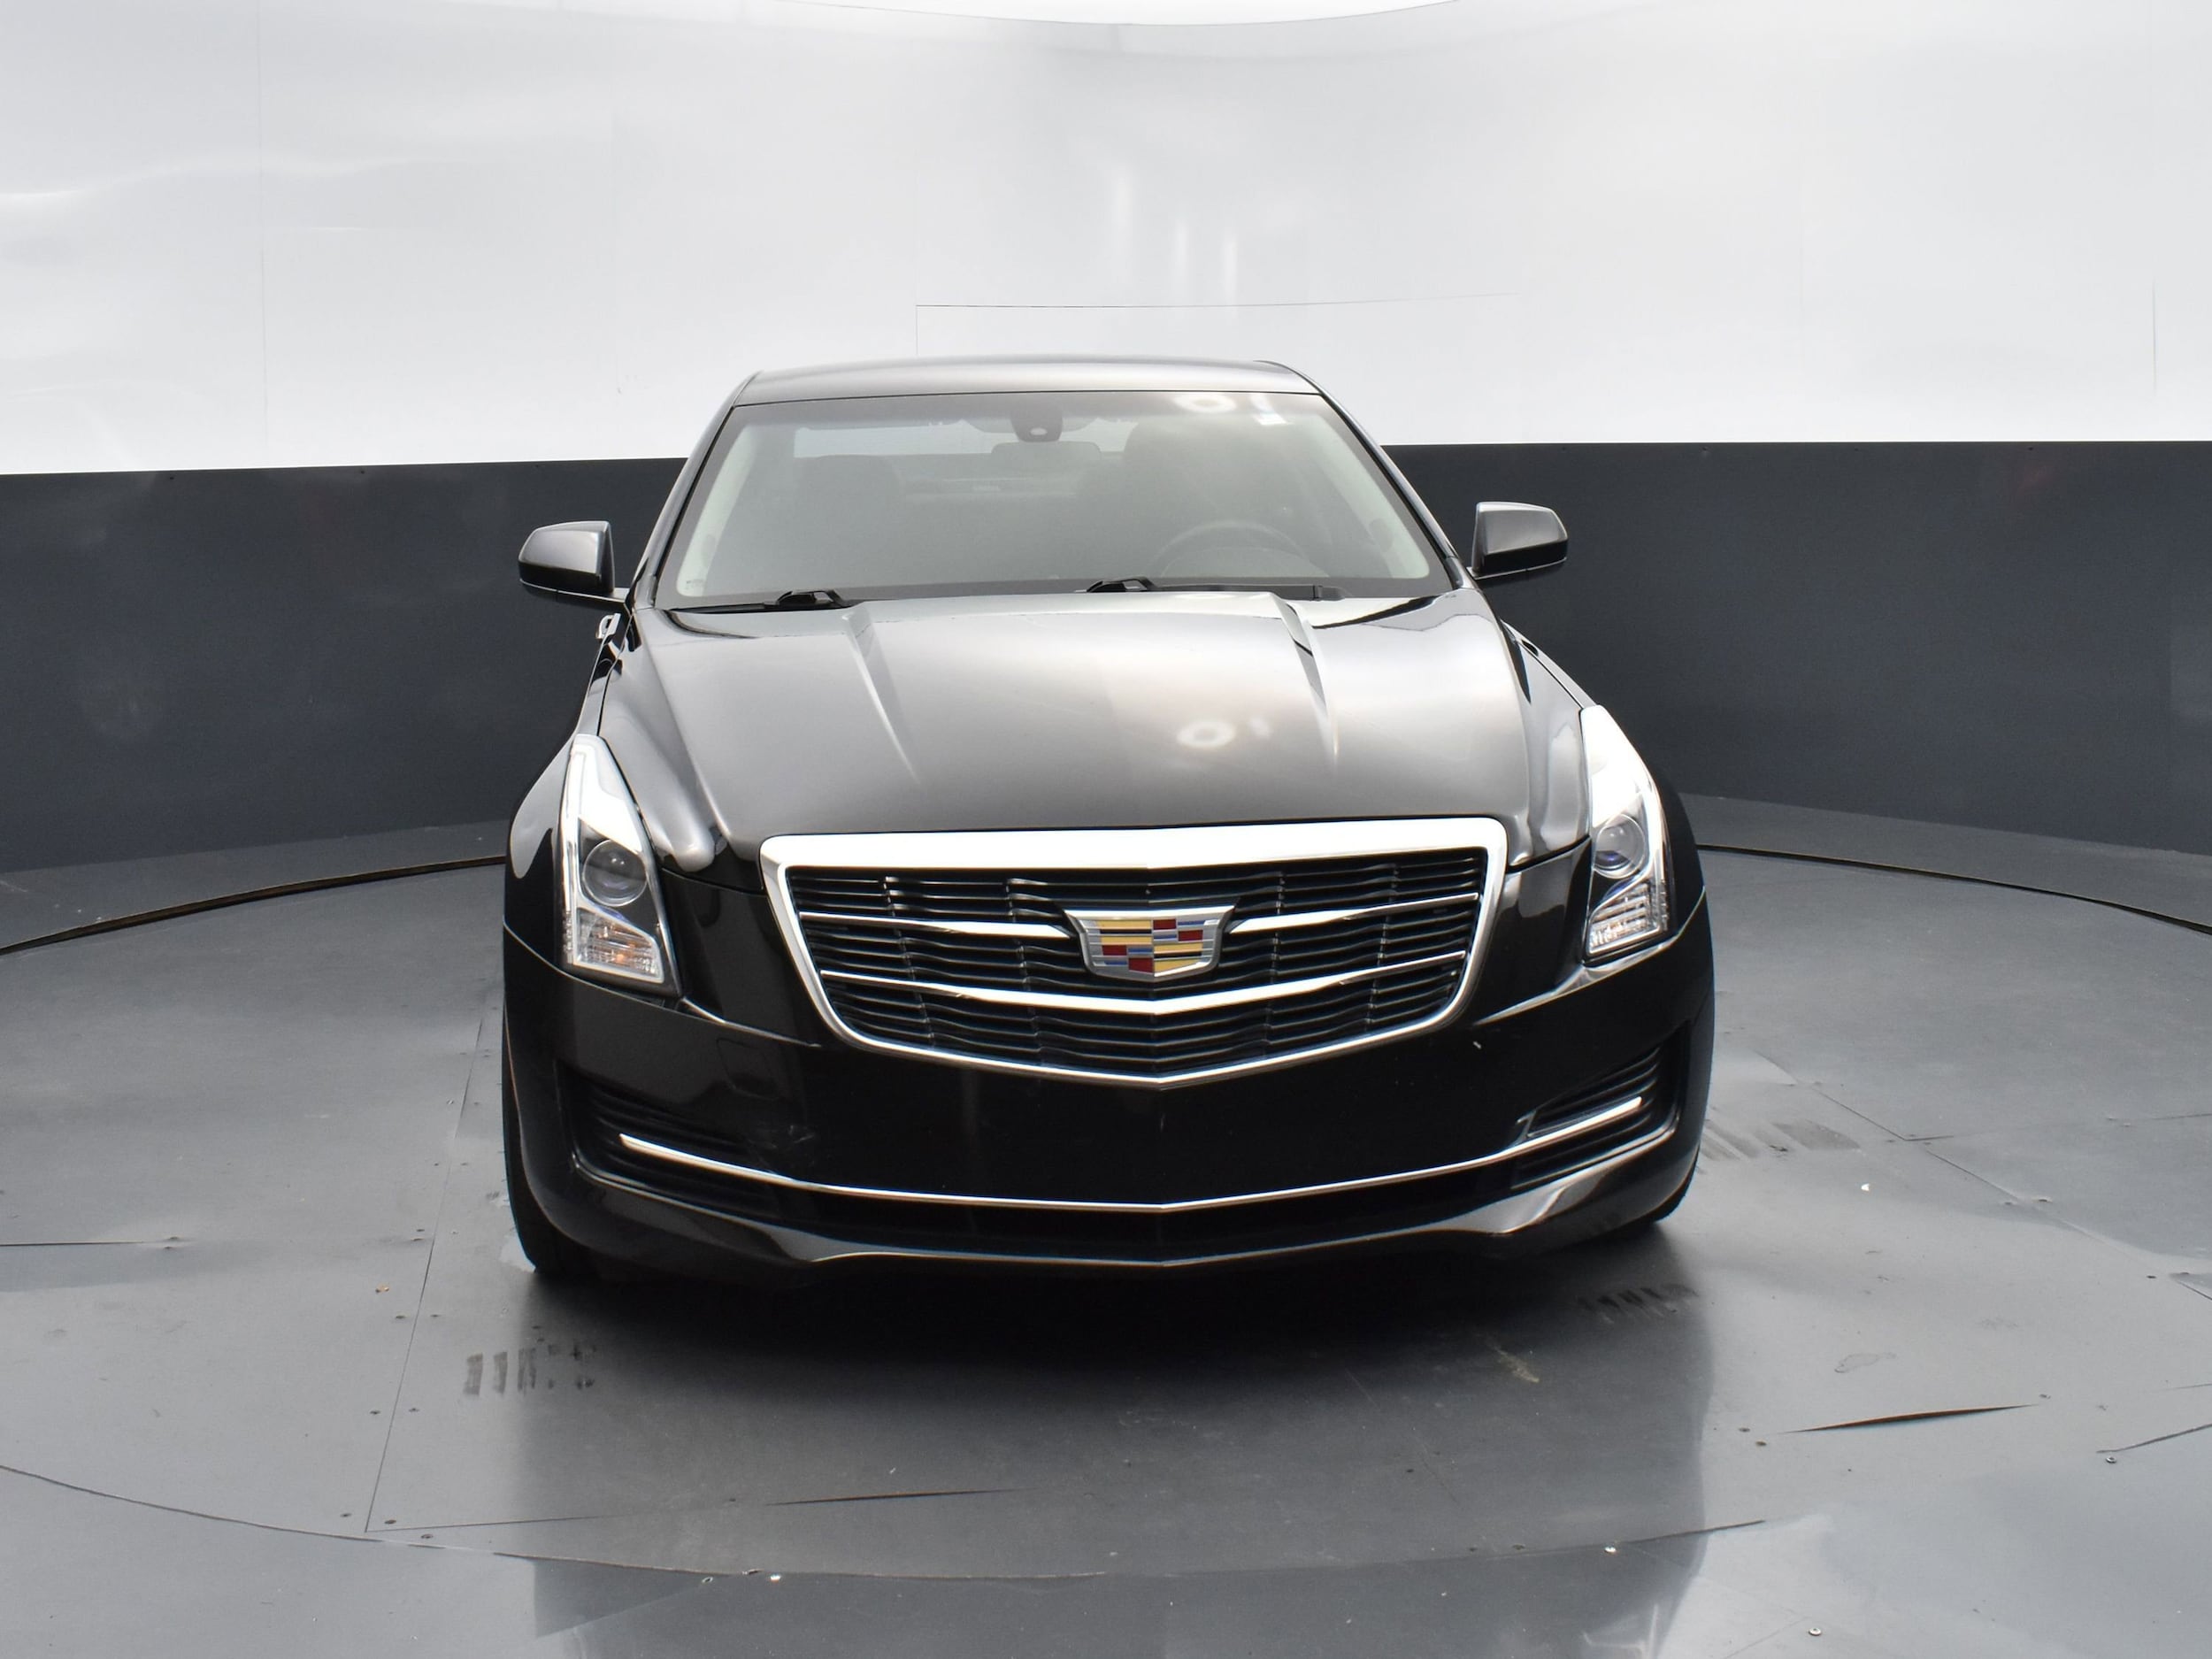 Used 2018 Cadillac ATS Sedan Base with VIN 1G6AA5RX4J0183051 for sale in Cary, NC